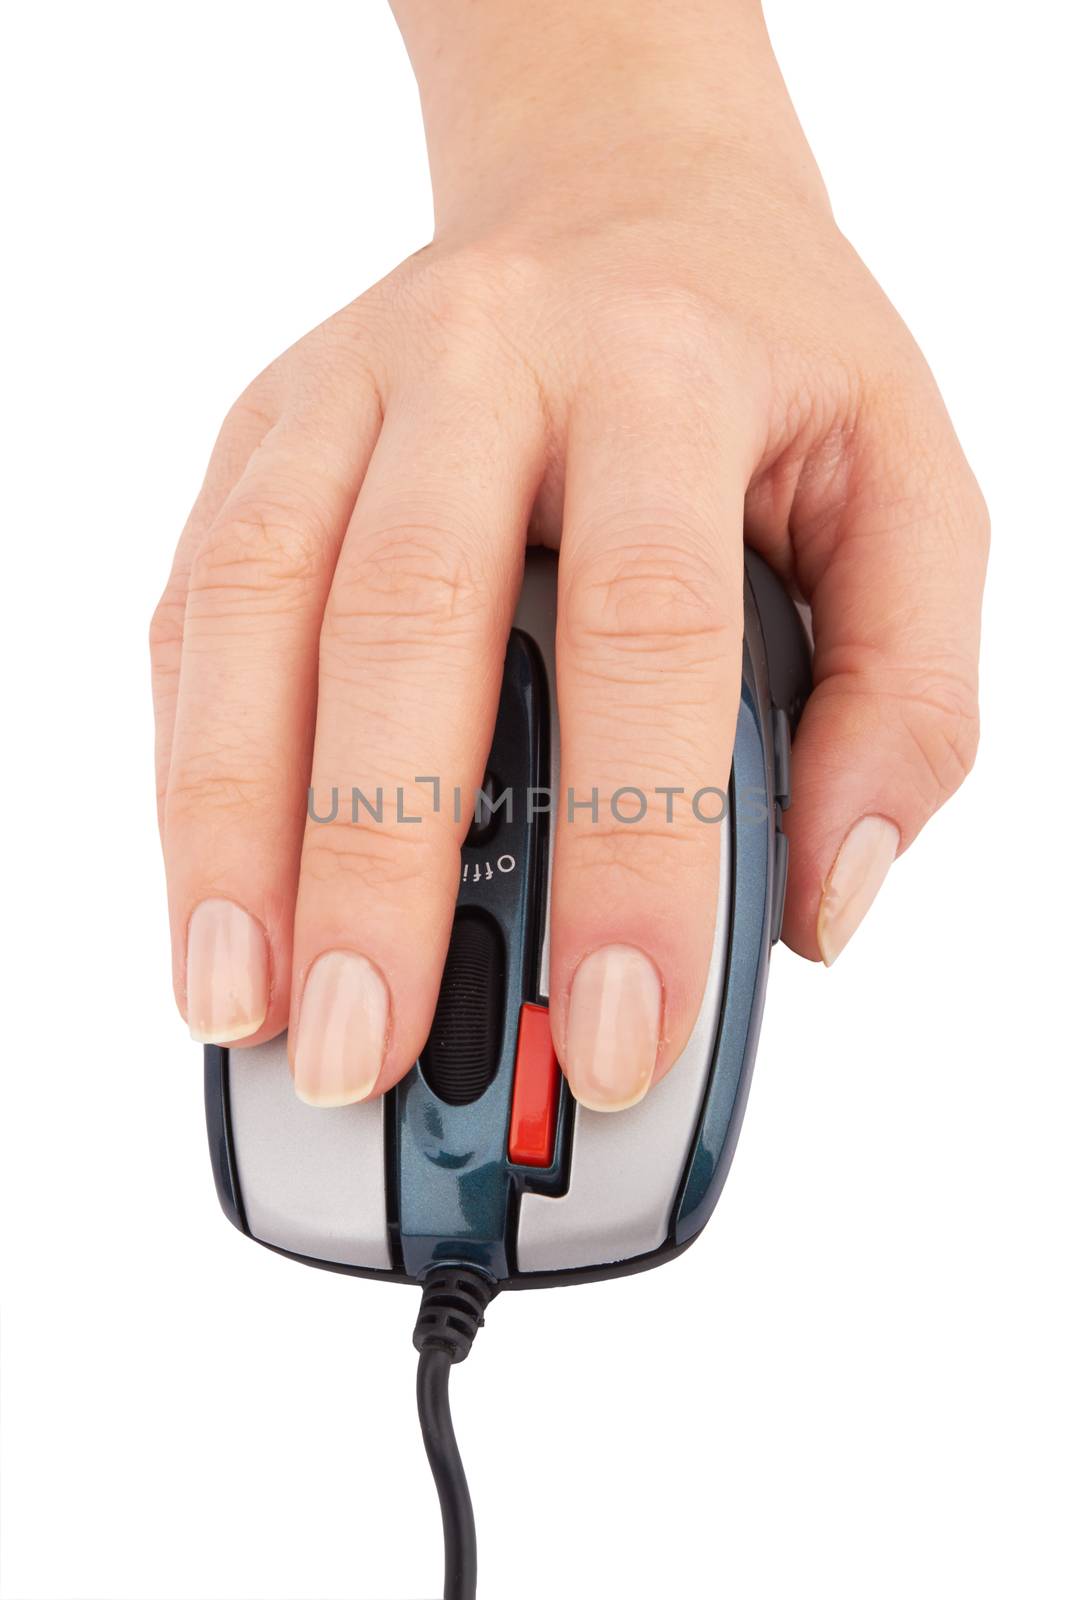 computer mouse and hand close up on a white